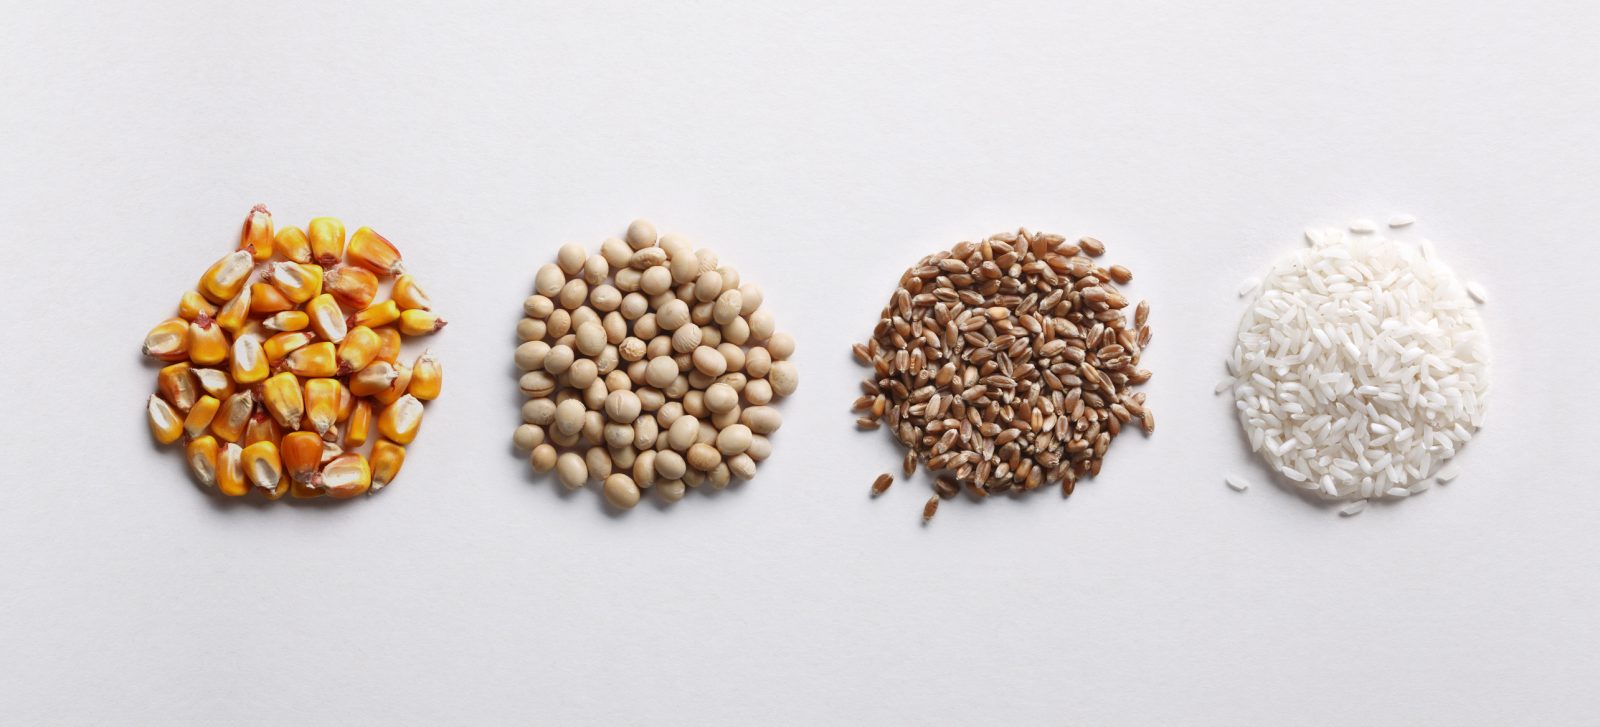 Four round piles of different seeds on a white surface.